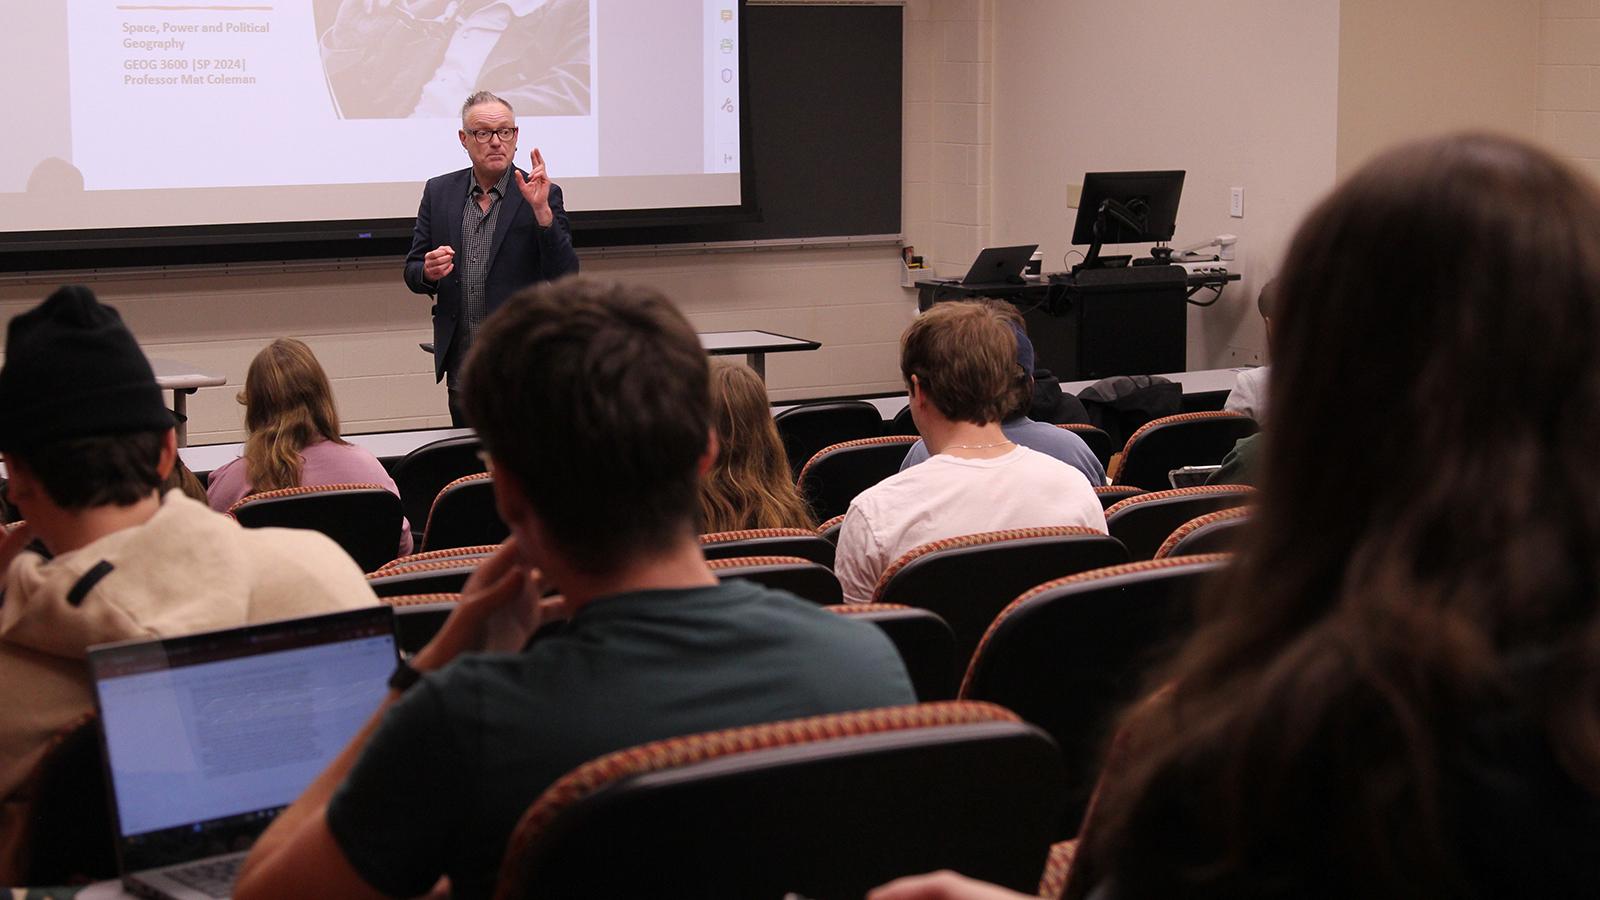 Dr. Mat Coleman teaching in GEOG 3600: Space, Power, and Political Geography